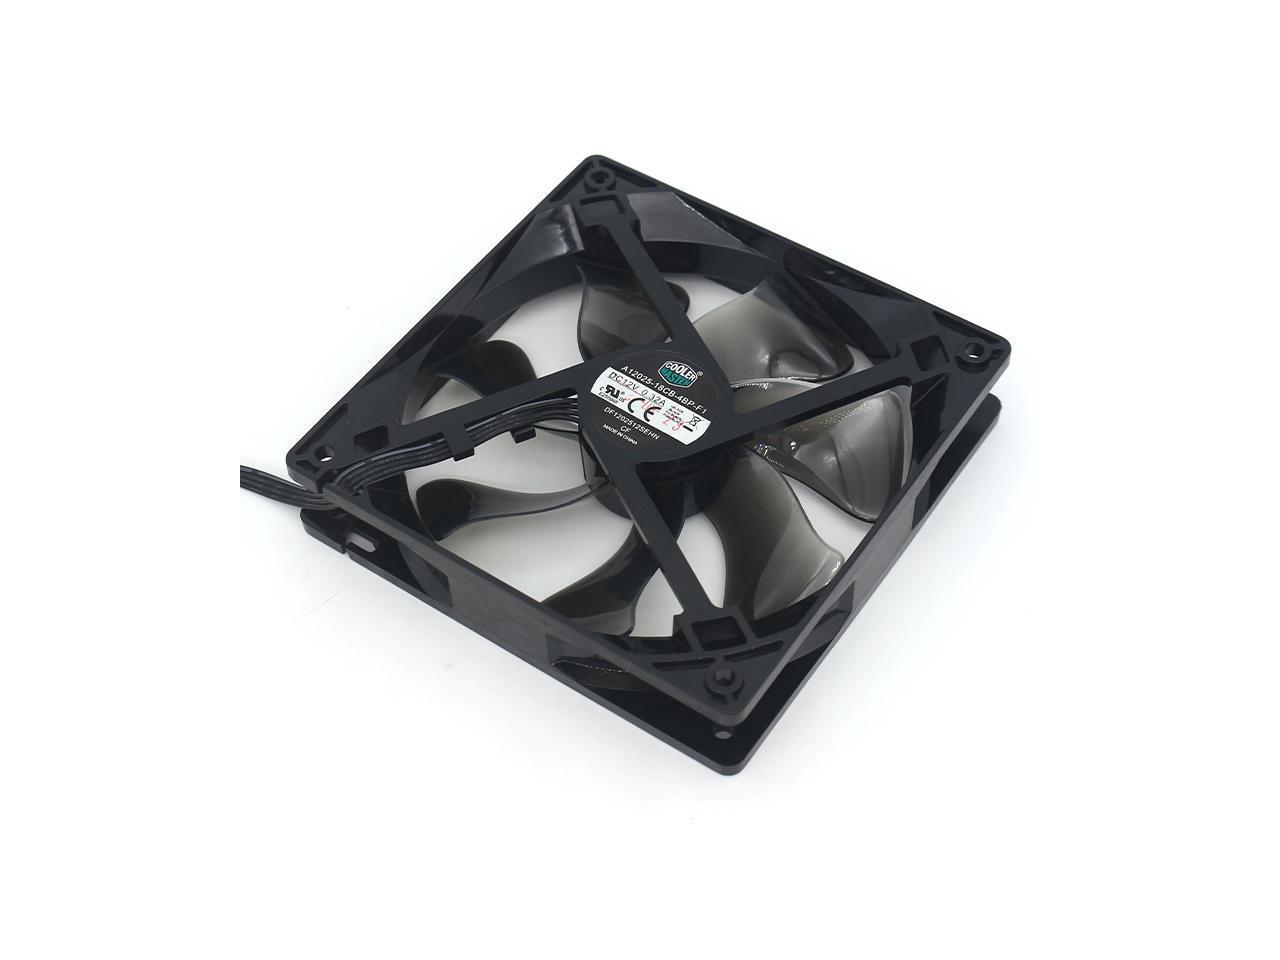 Original FOR AVC F1225B12H 12V 0.45A 12cm 12025 double ball chassis cooling fan